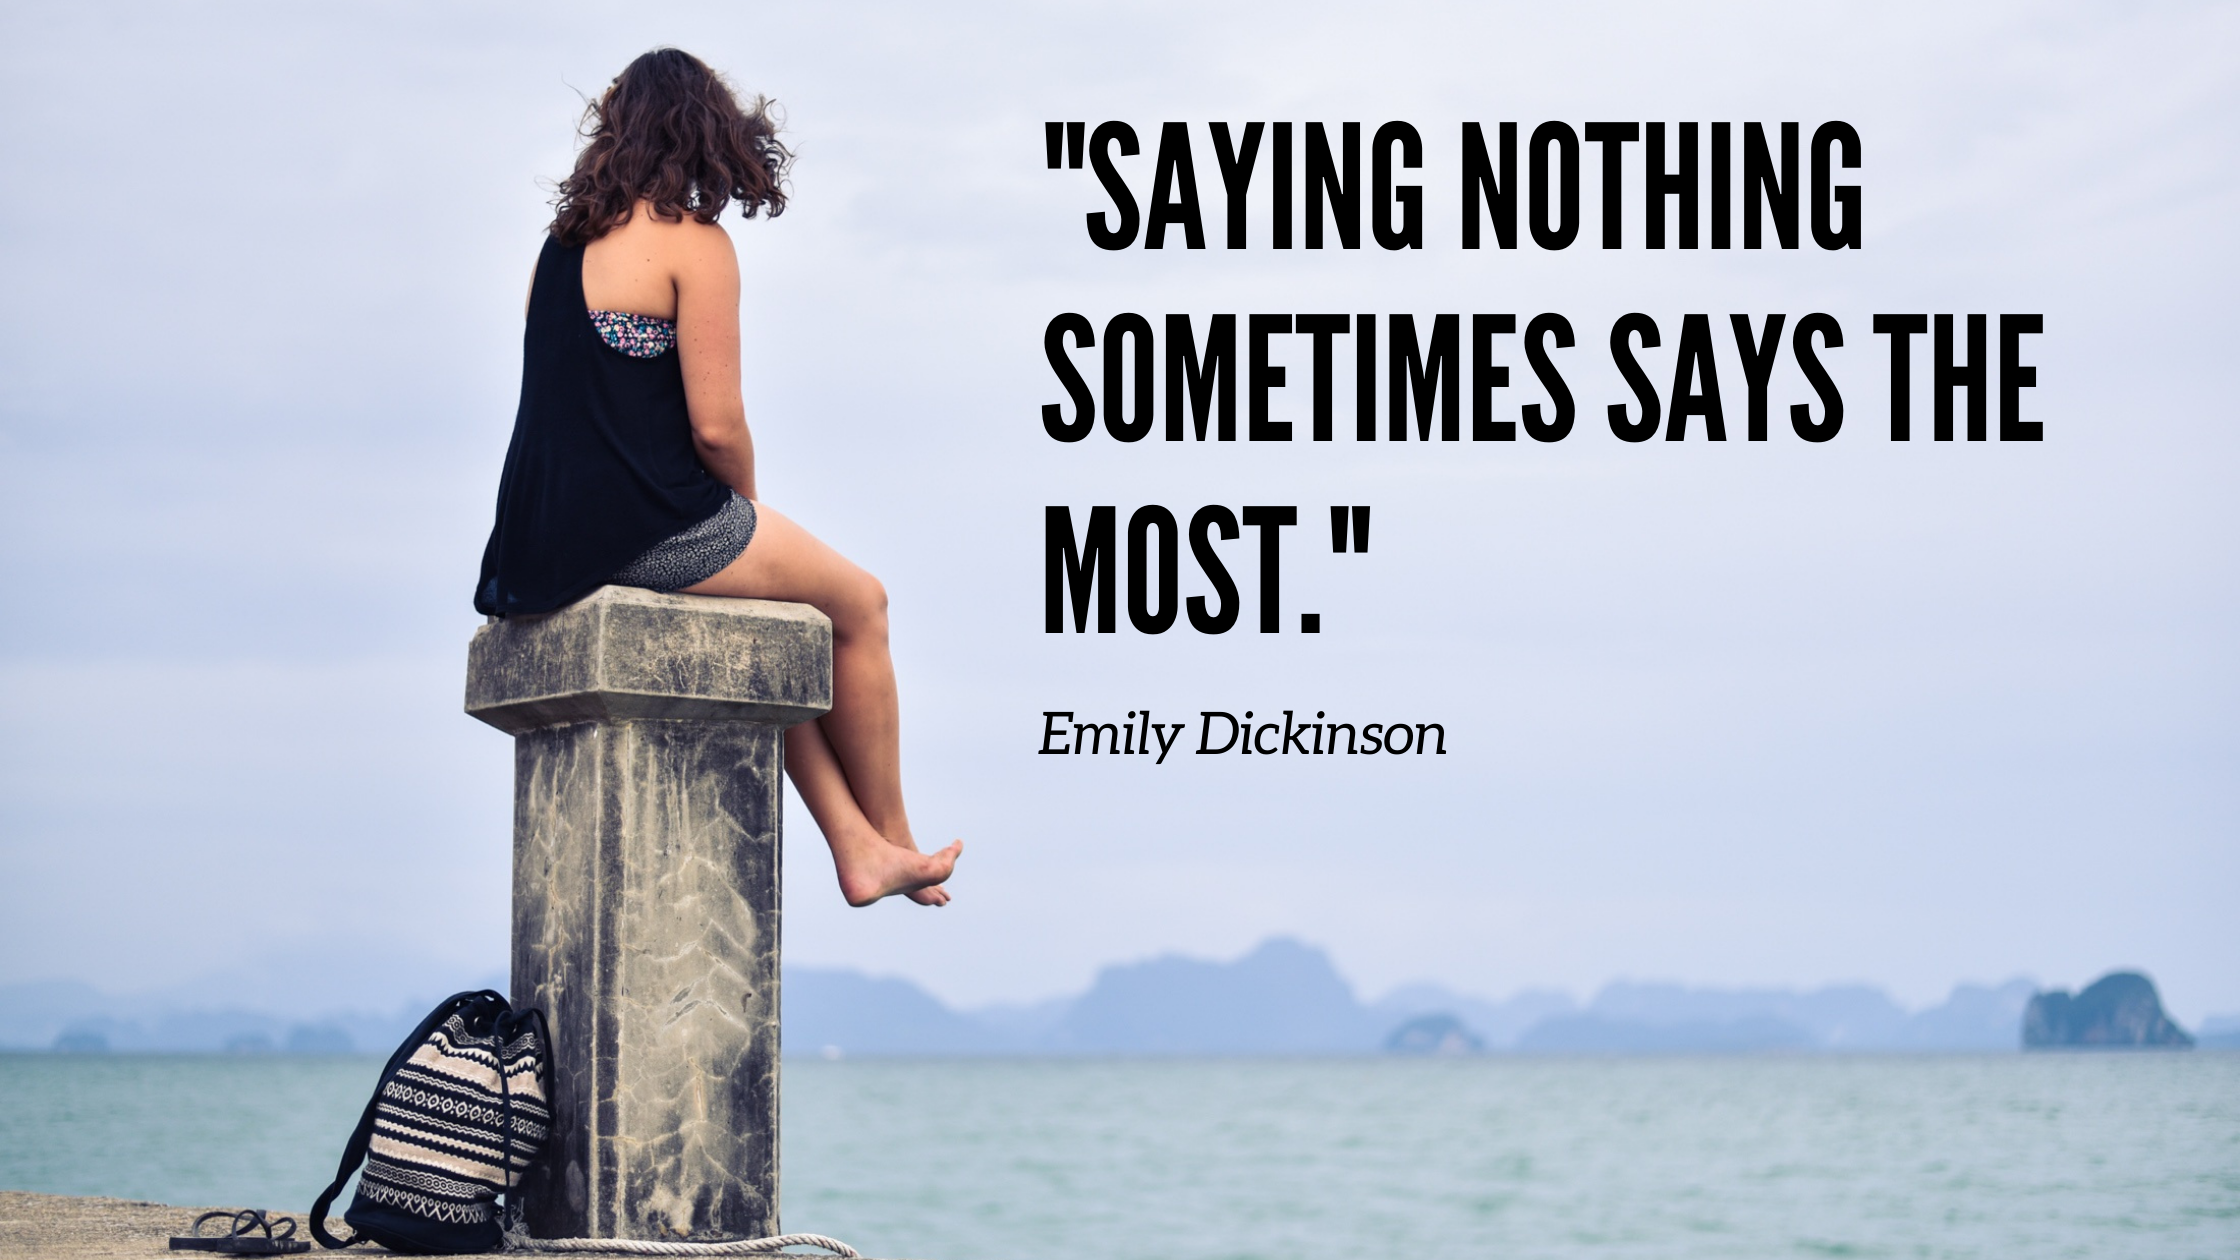 Saying nothing sometimes says the most. -Emily Dickinson